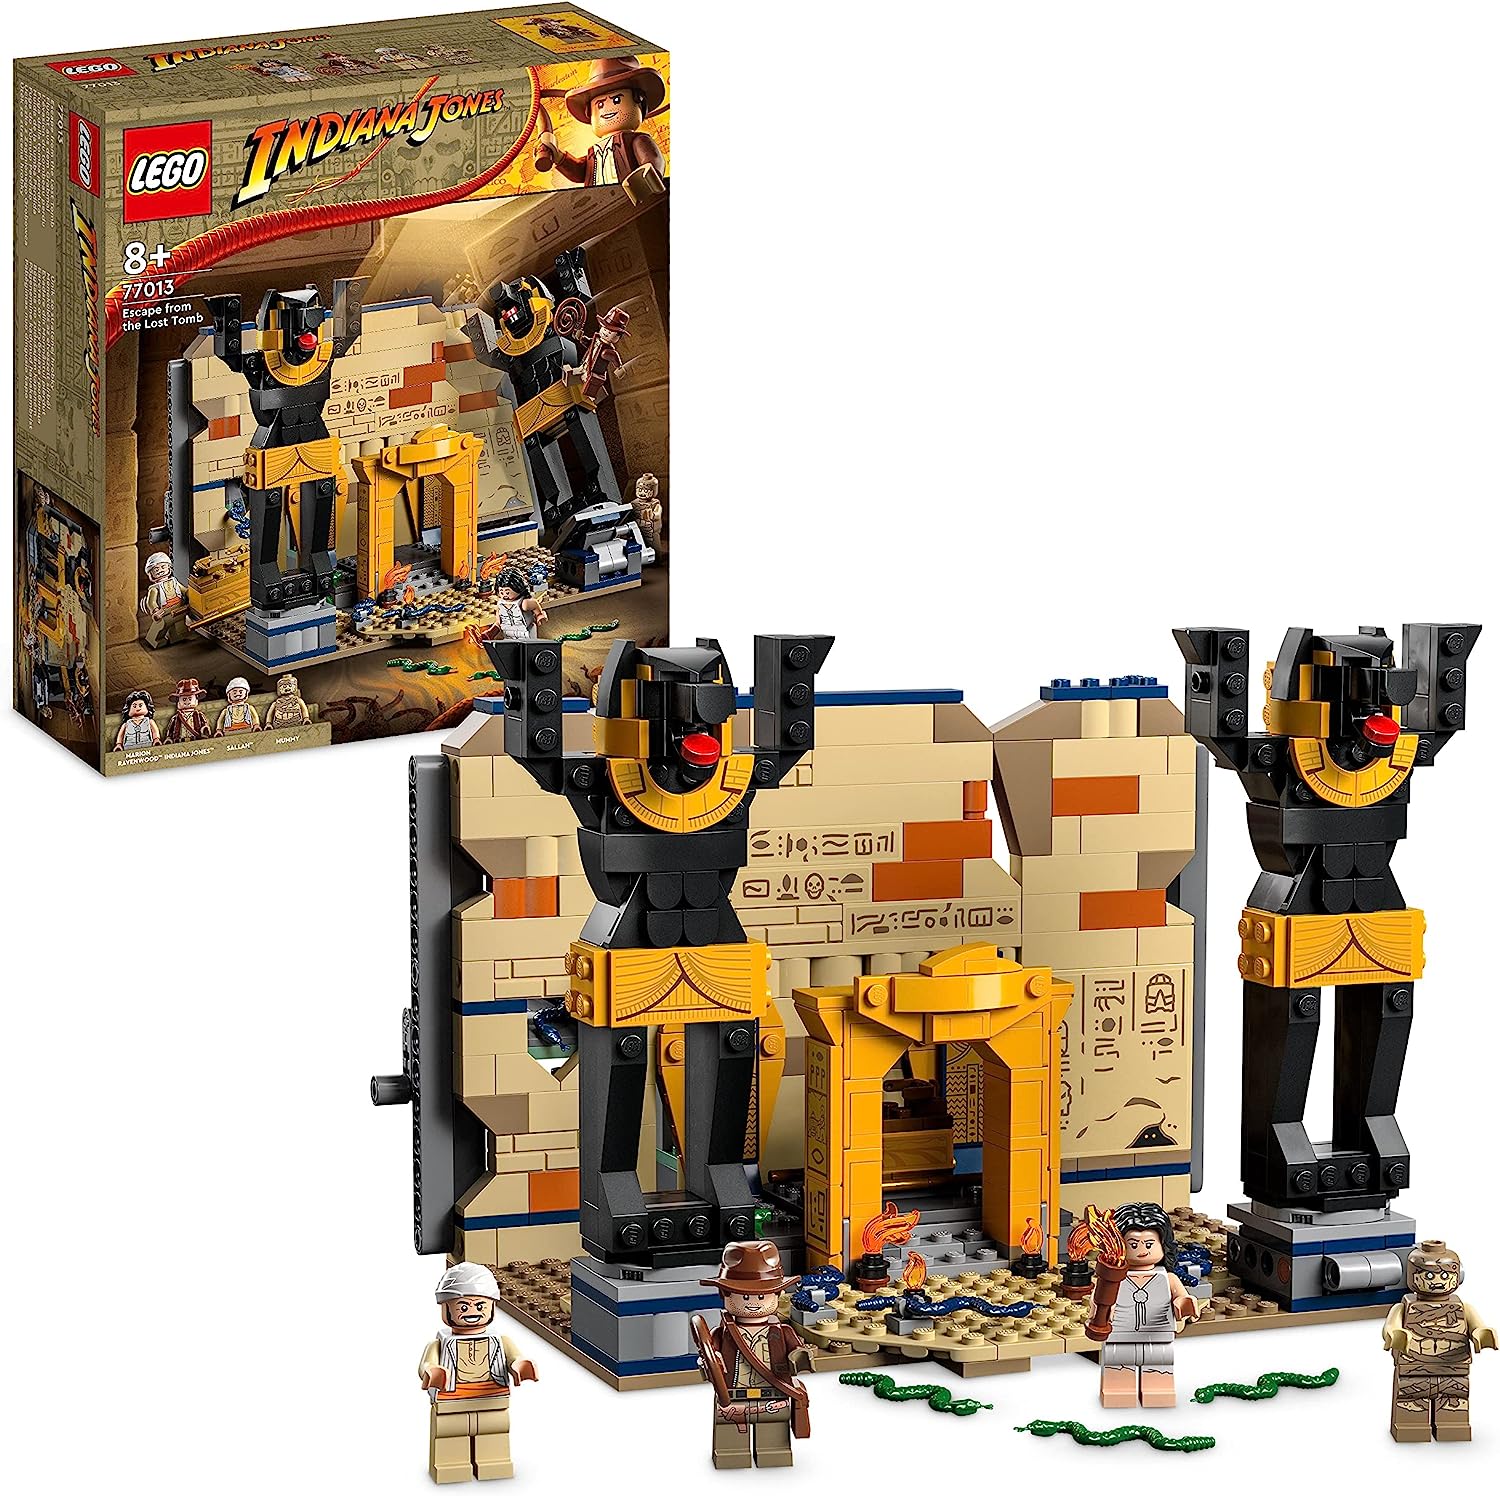 LEGO 77013 Indiana Jones escape from the grave construction toy with temple and mummy mini figure, Hunter of Lost treasure movie set, poison idea for children